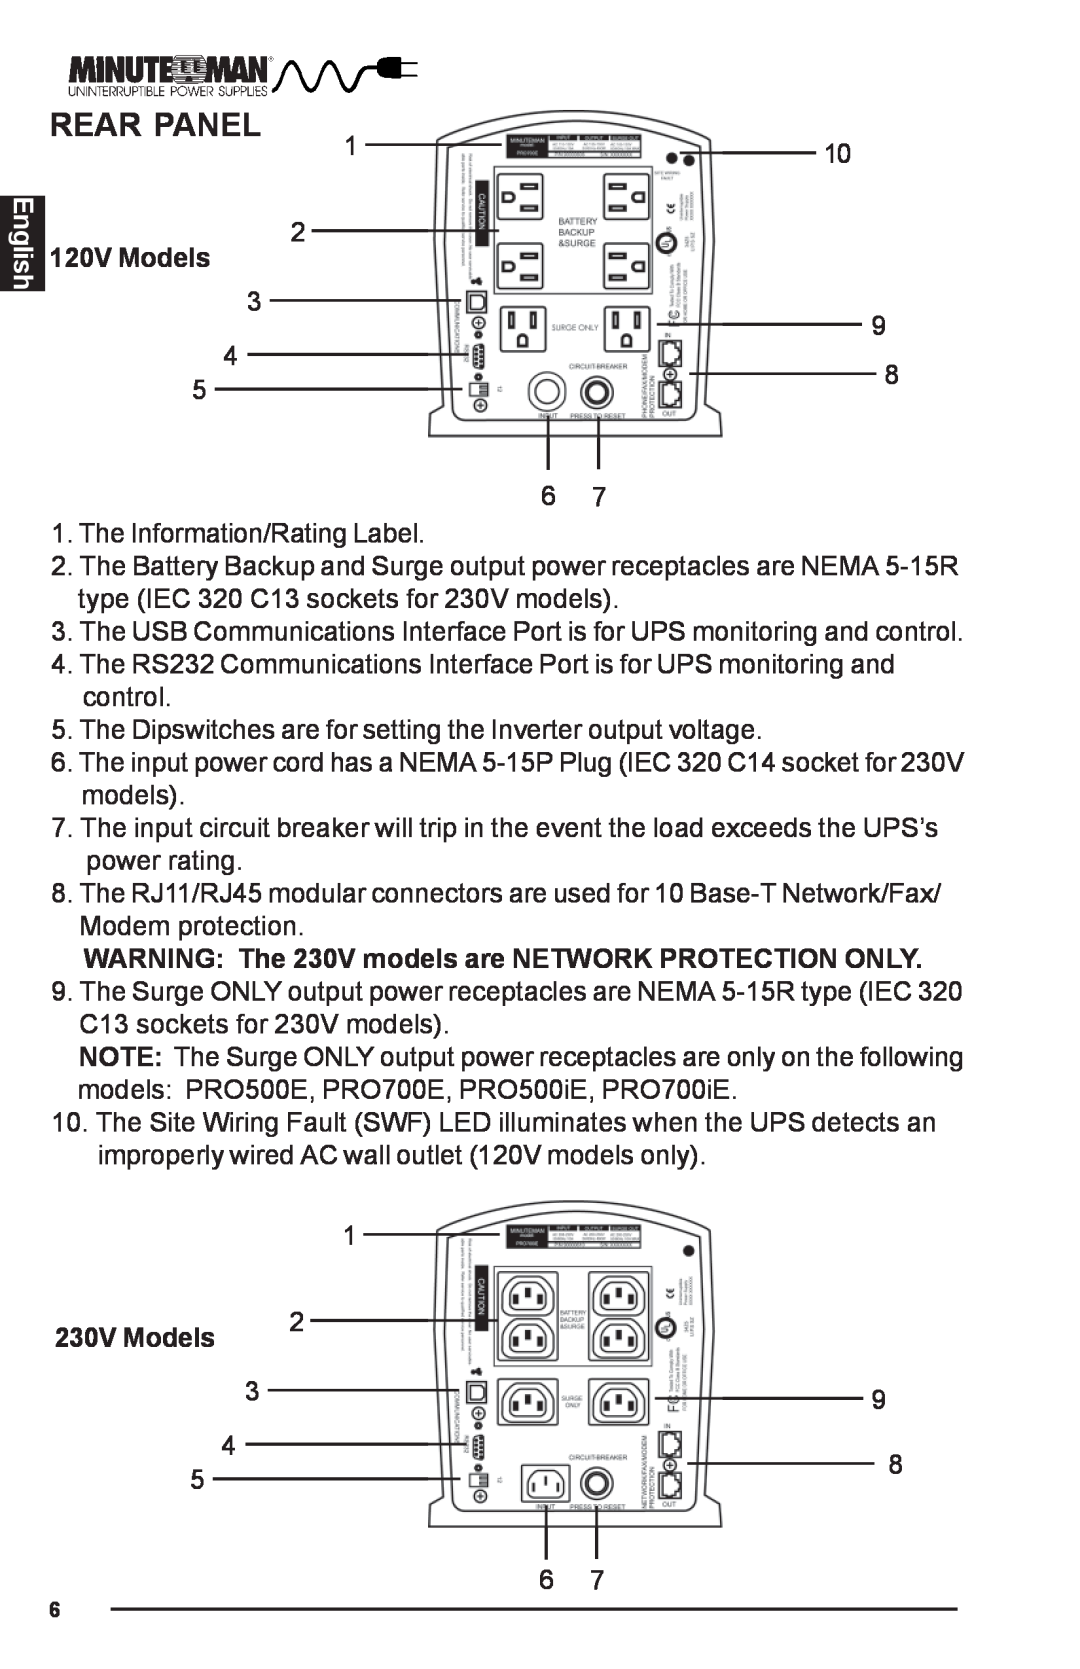 Rackmount Solutions PRO1500E manual Rear Panel, English, 120V Models, WARNING The 230V models are NETWORK PROTECTION ONLY 